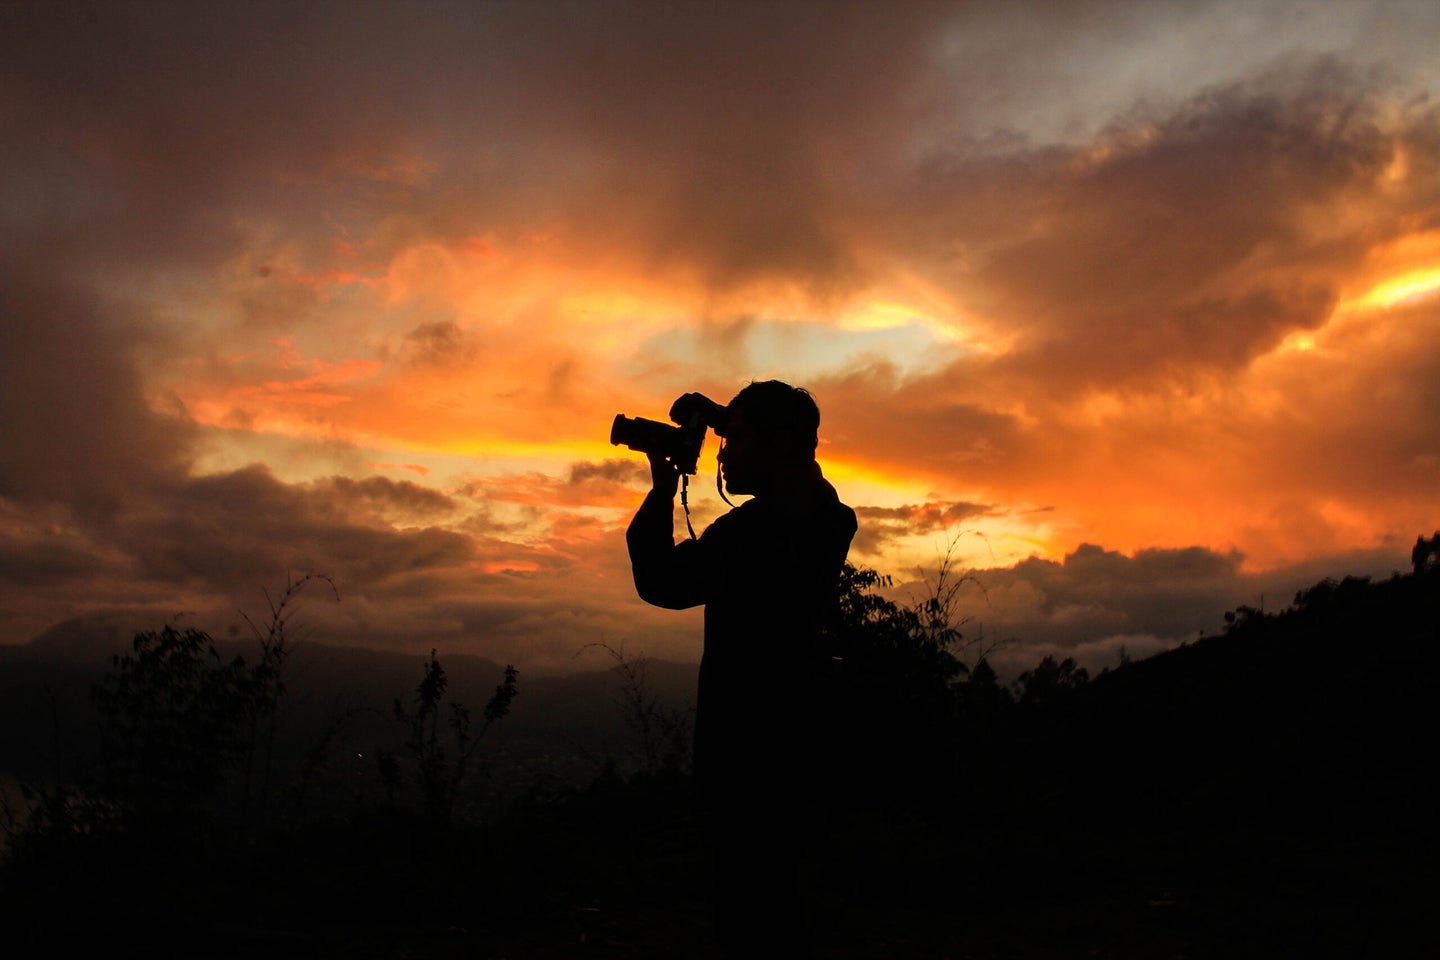 Silhouette Man Photographing Against Sky During Sunset - stock photo